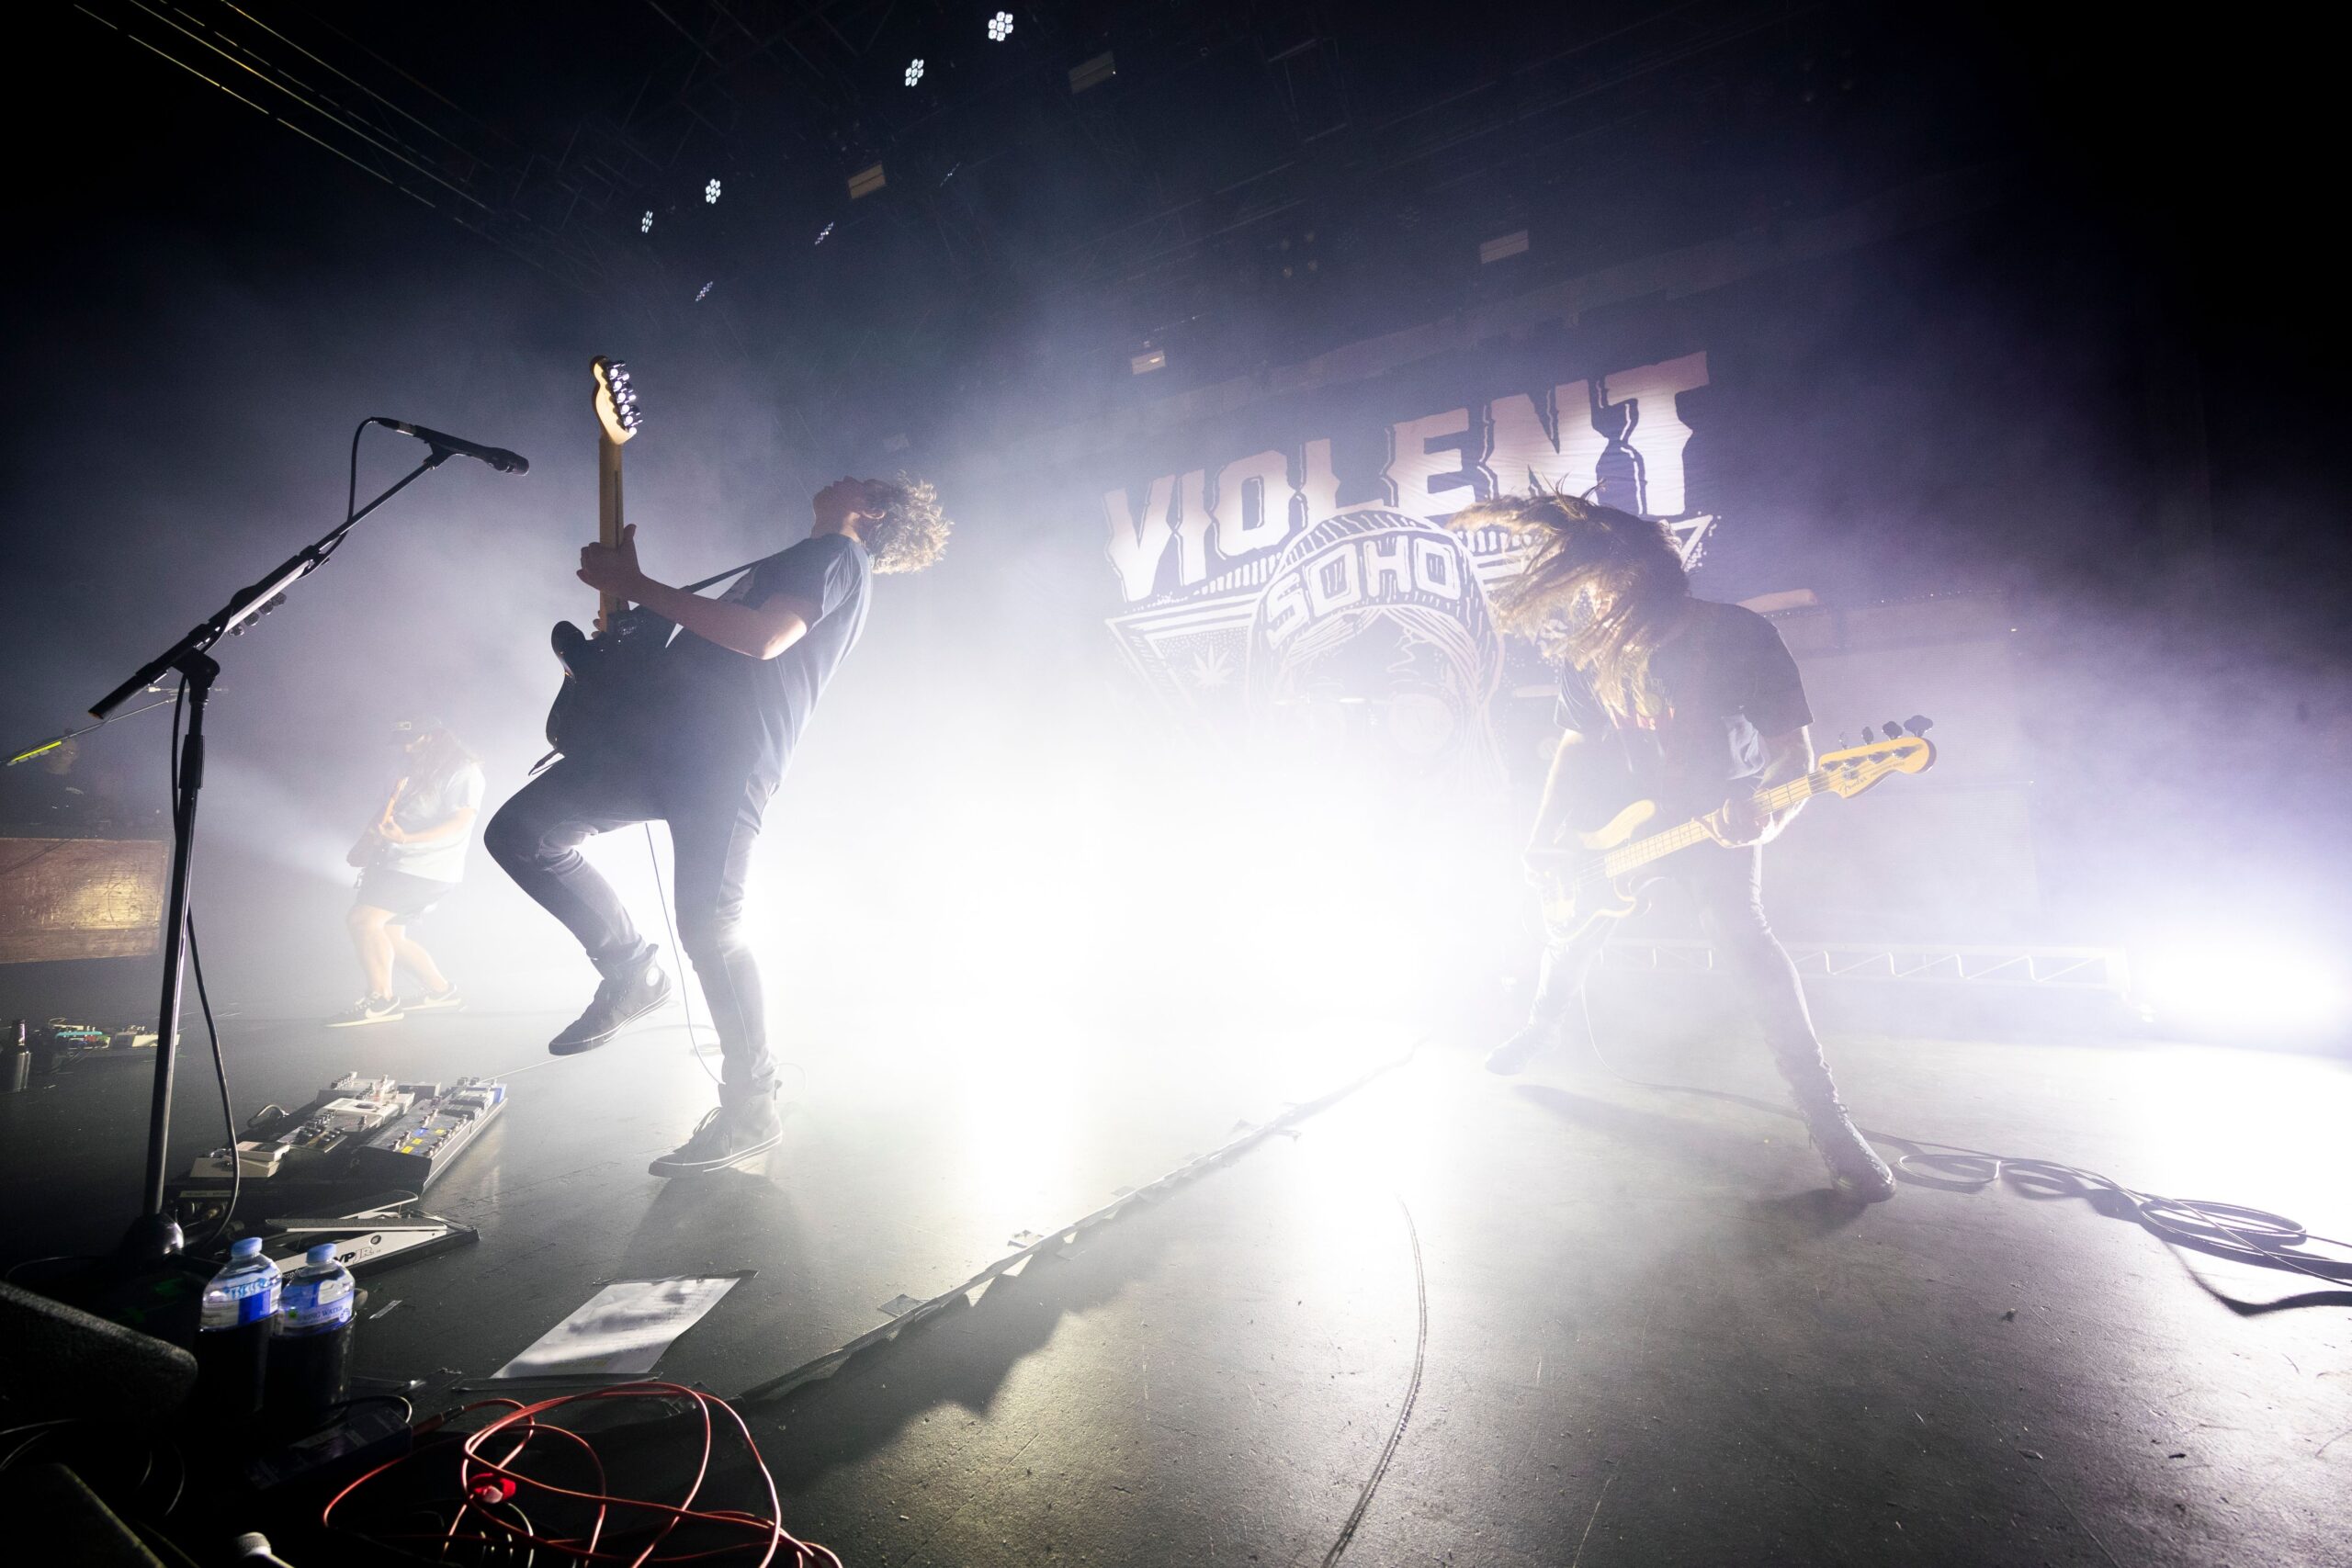 VIOLENT SOHO ANNOUNCE SHOW AT SYDNEY’S ROUNDHOUSE ON THURSDAY 31 MARCH